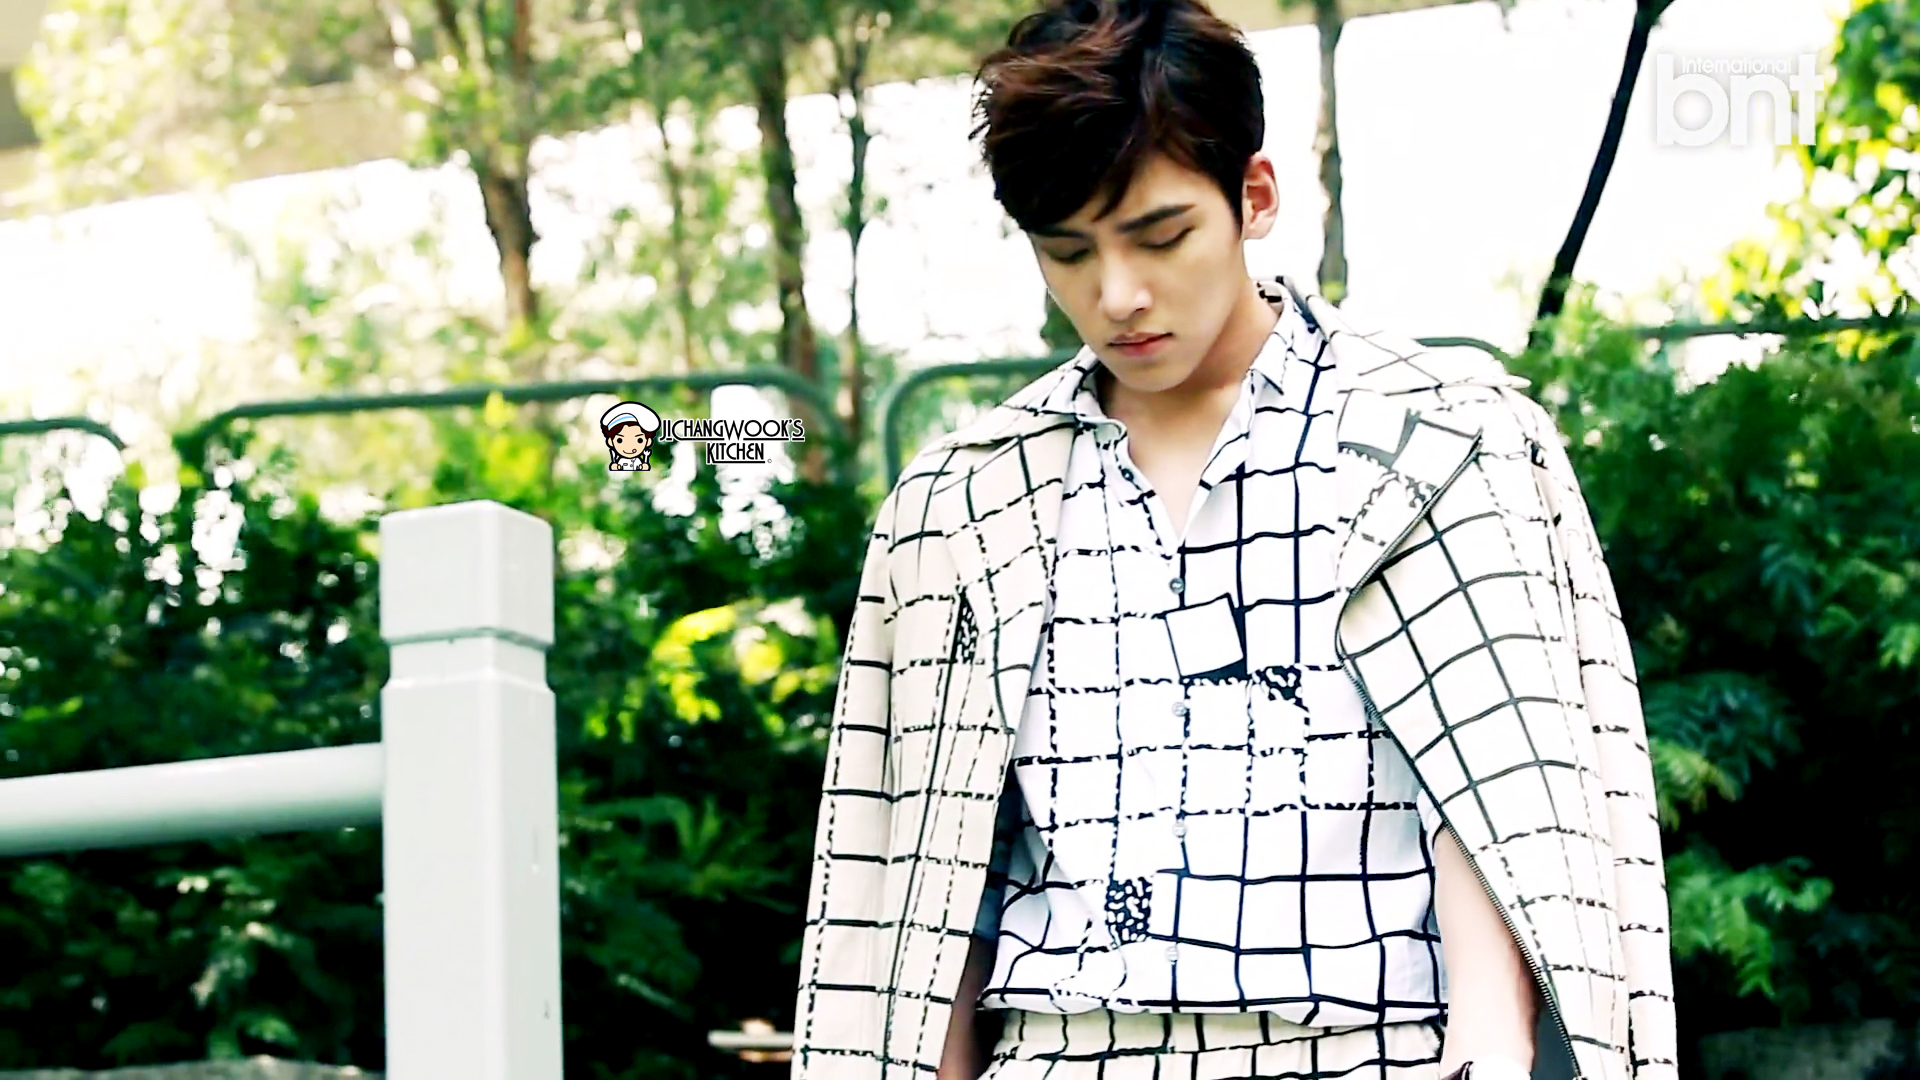 Bnt012 - Ji Chang Wook Hd Photoshoot, wallpapers & background download.